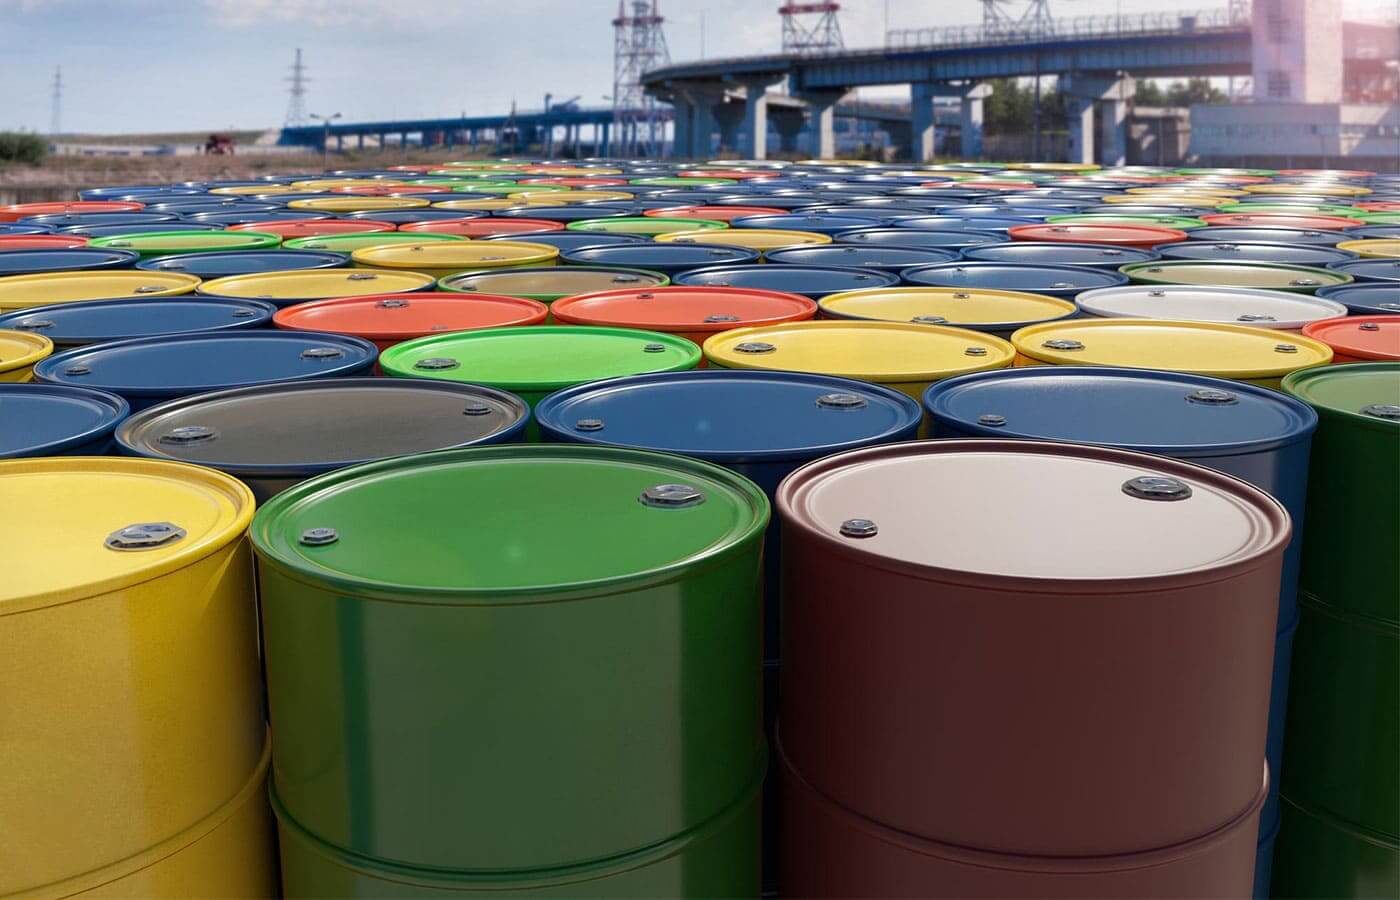 A large collection of oil drums stored at a port